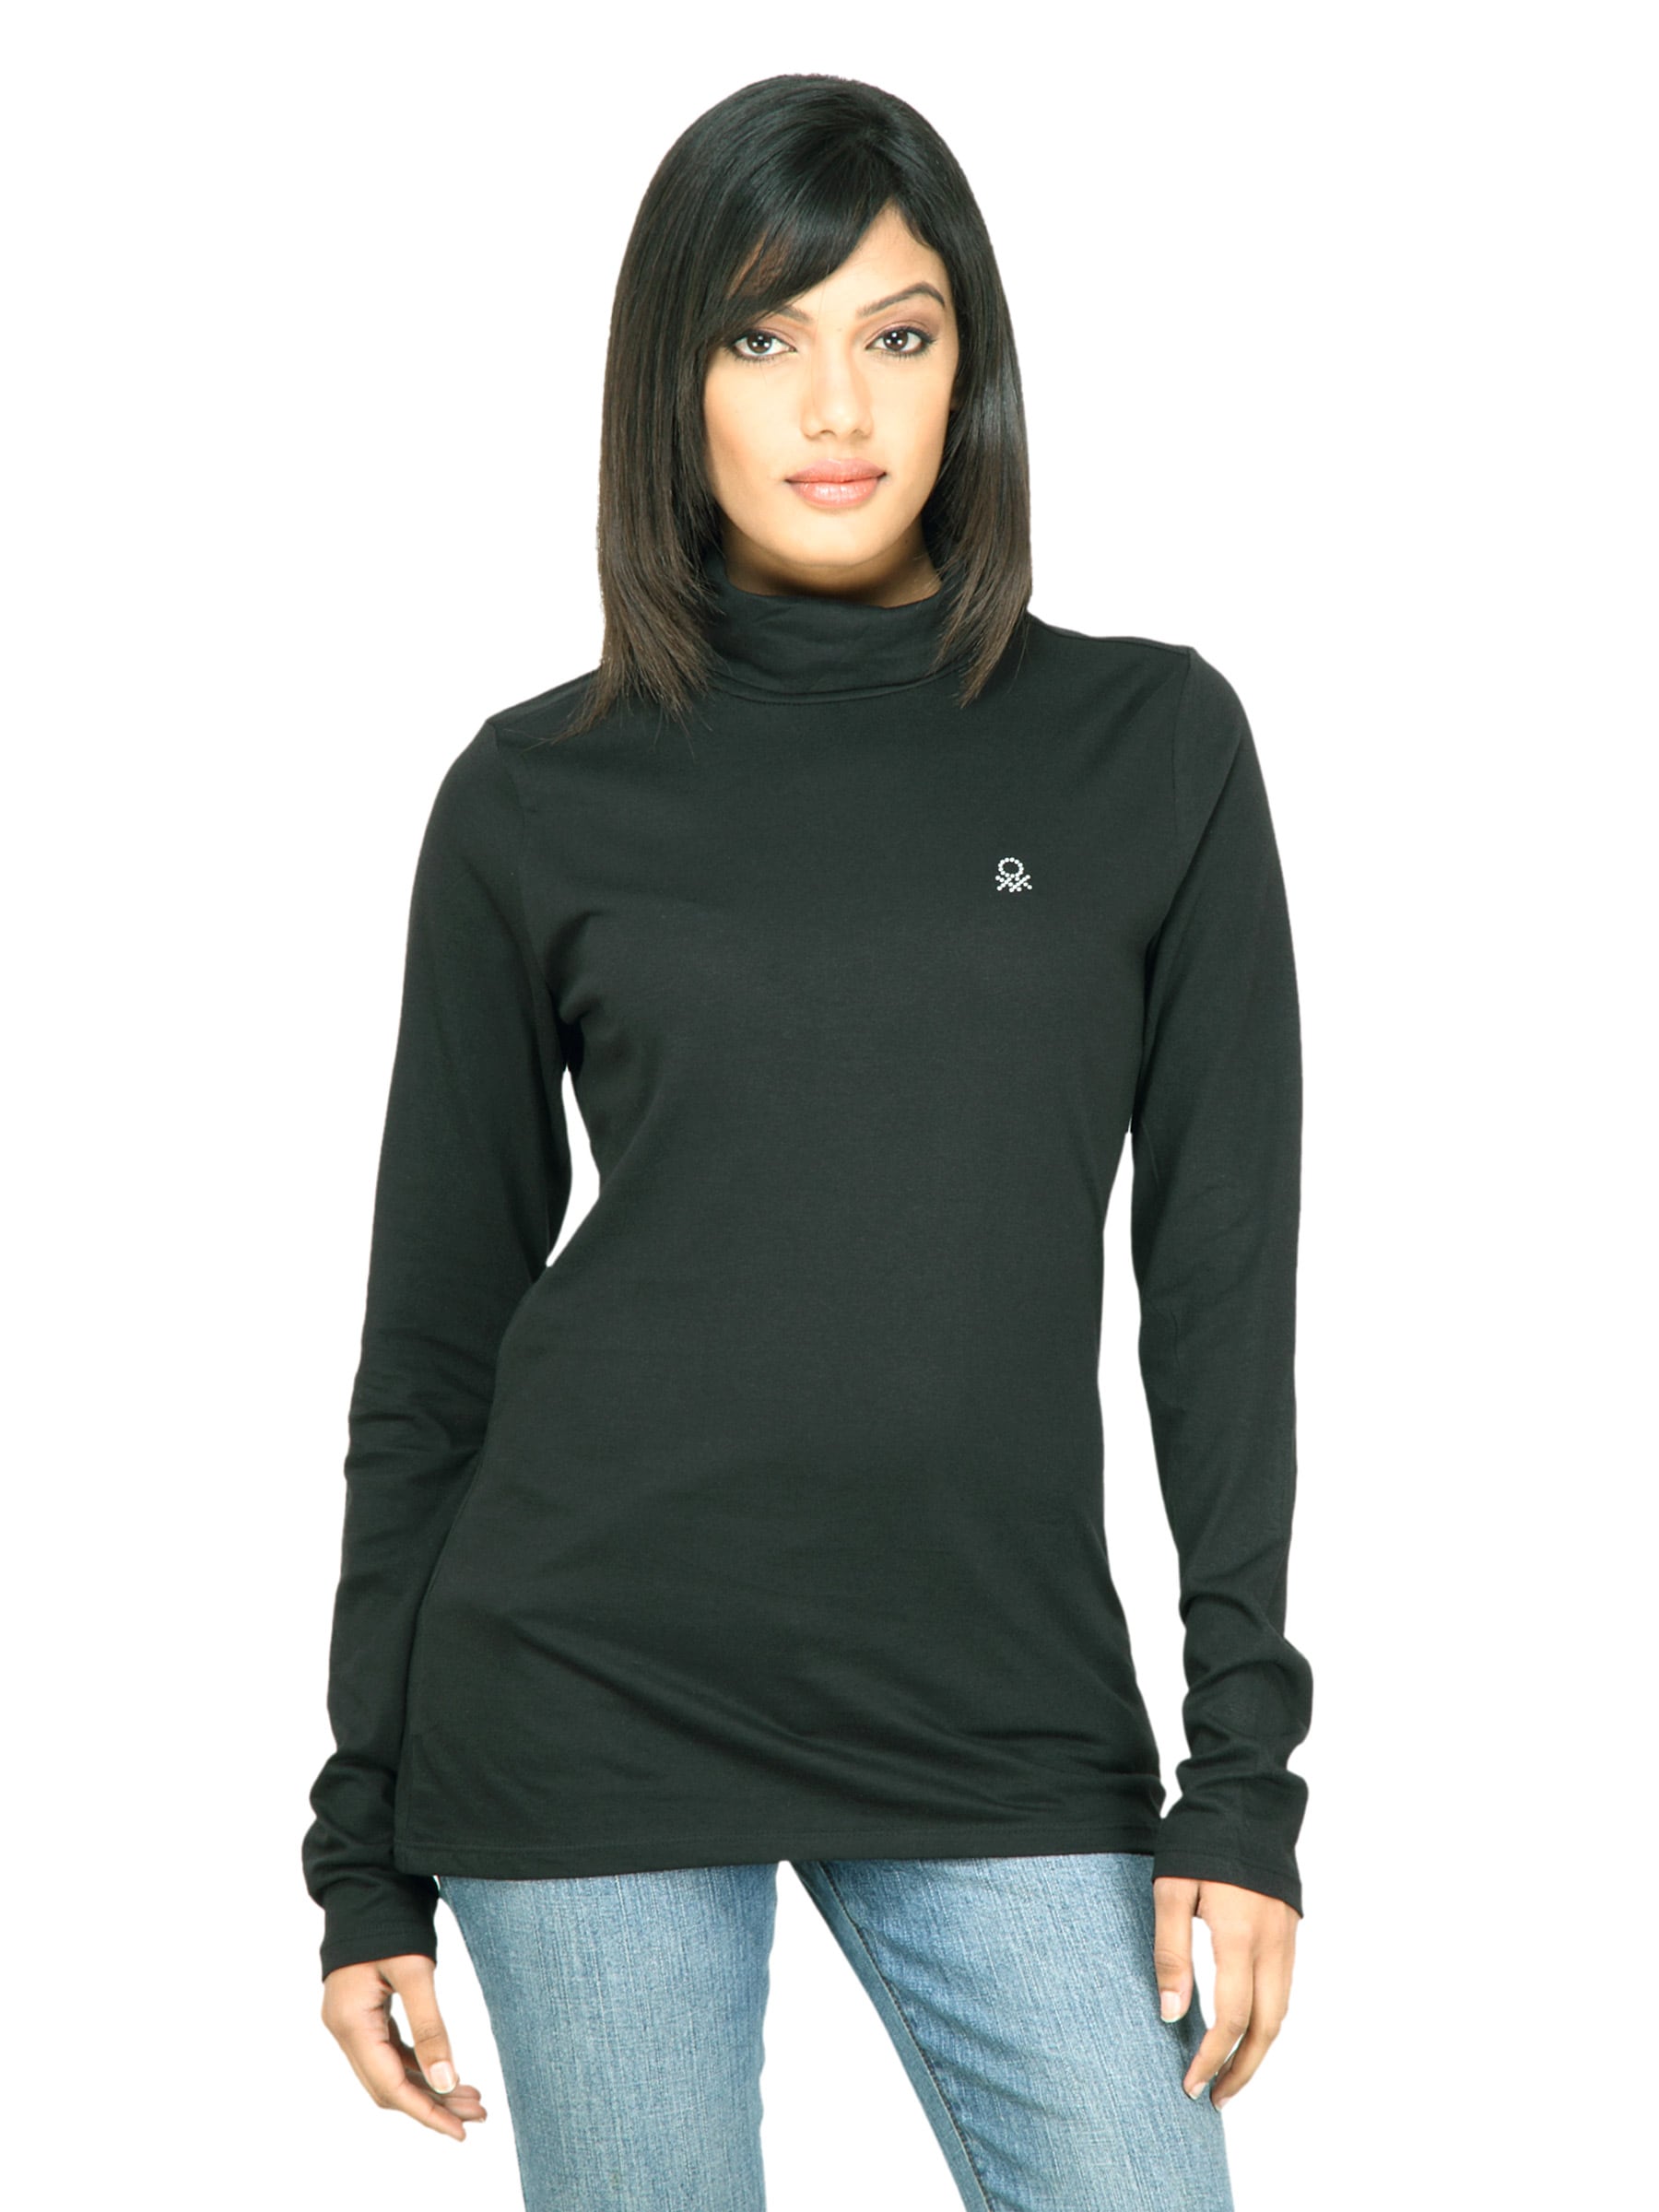 United Colors of Benetton Women Solid Black Top